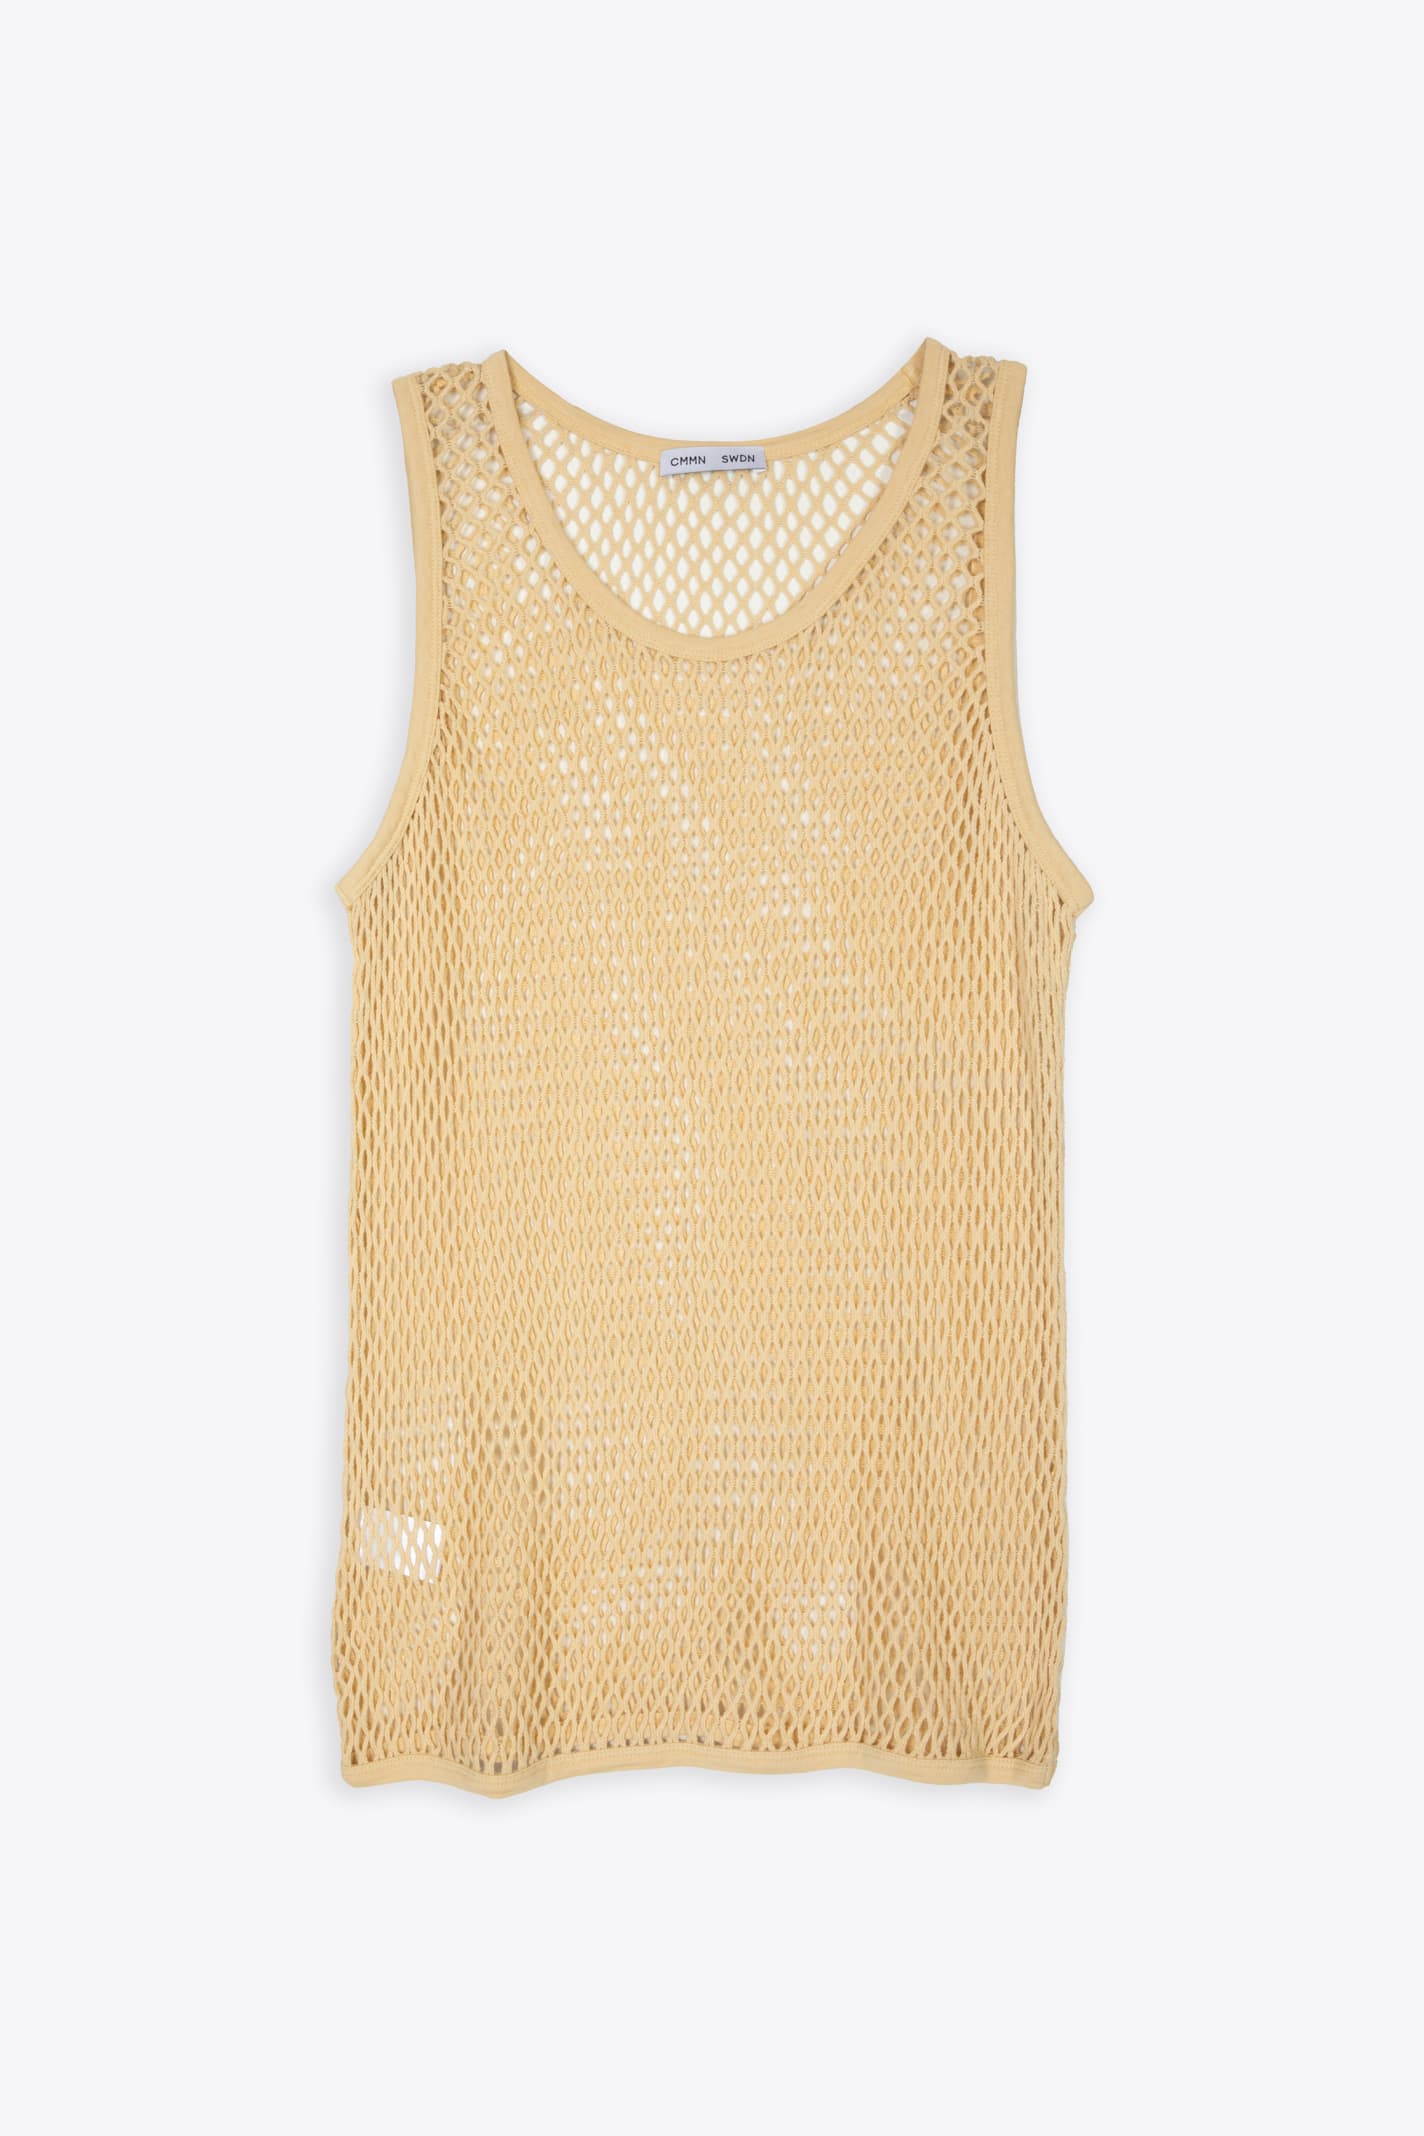 Cmmn Swdn Net Tank Top In Cotton With Knitted Rib Collar Beige